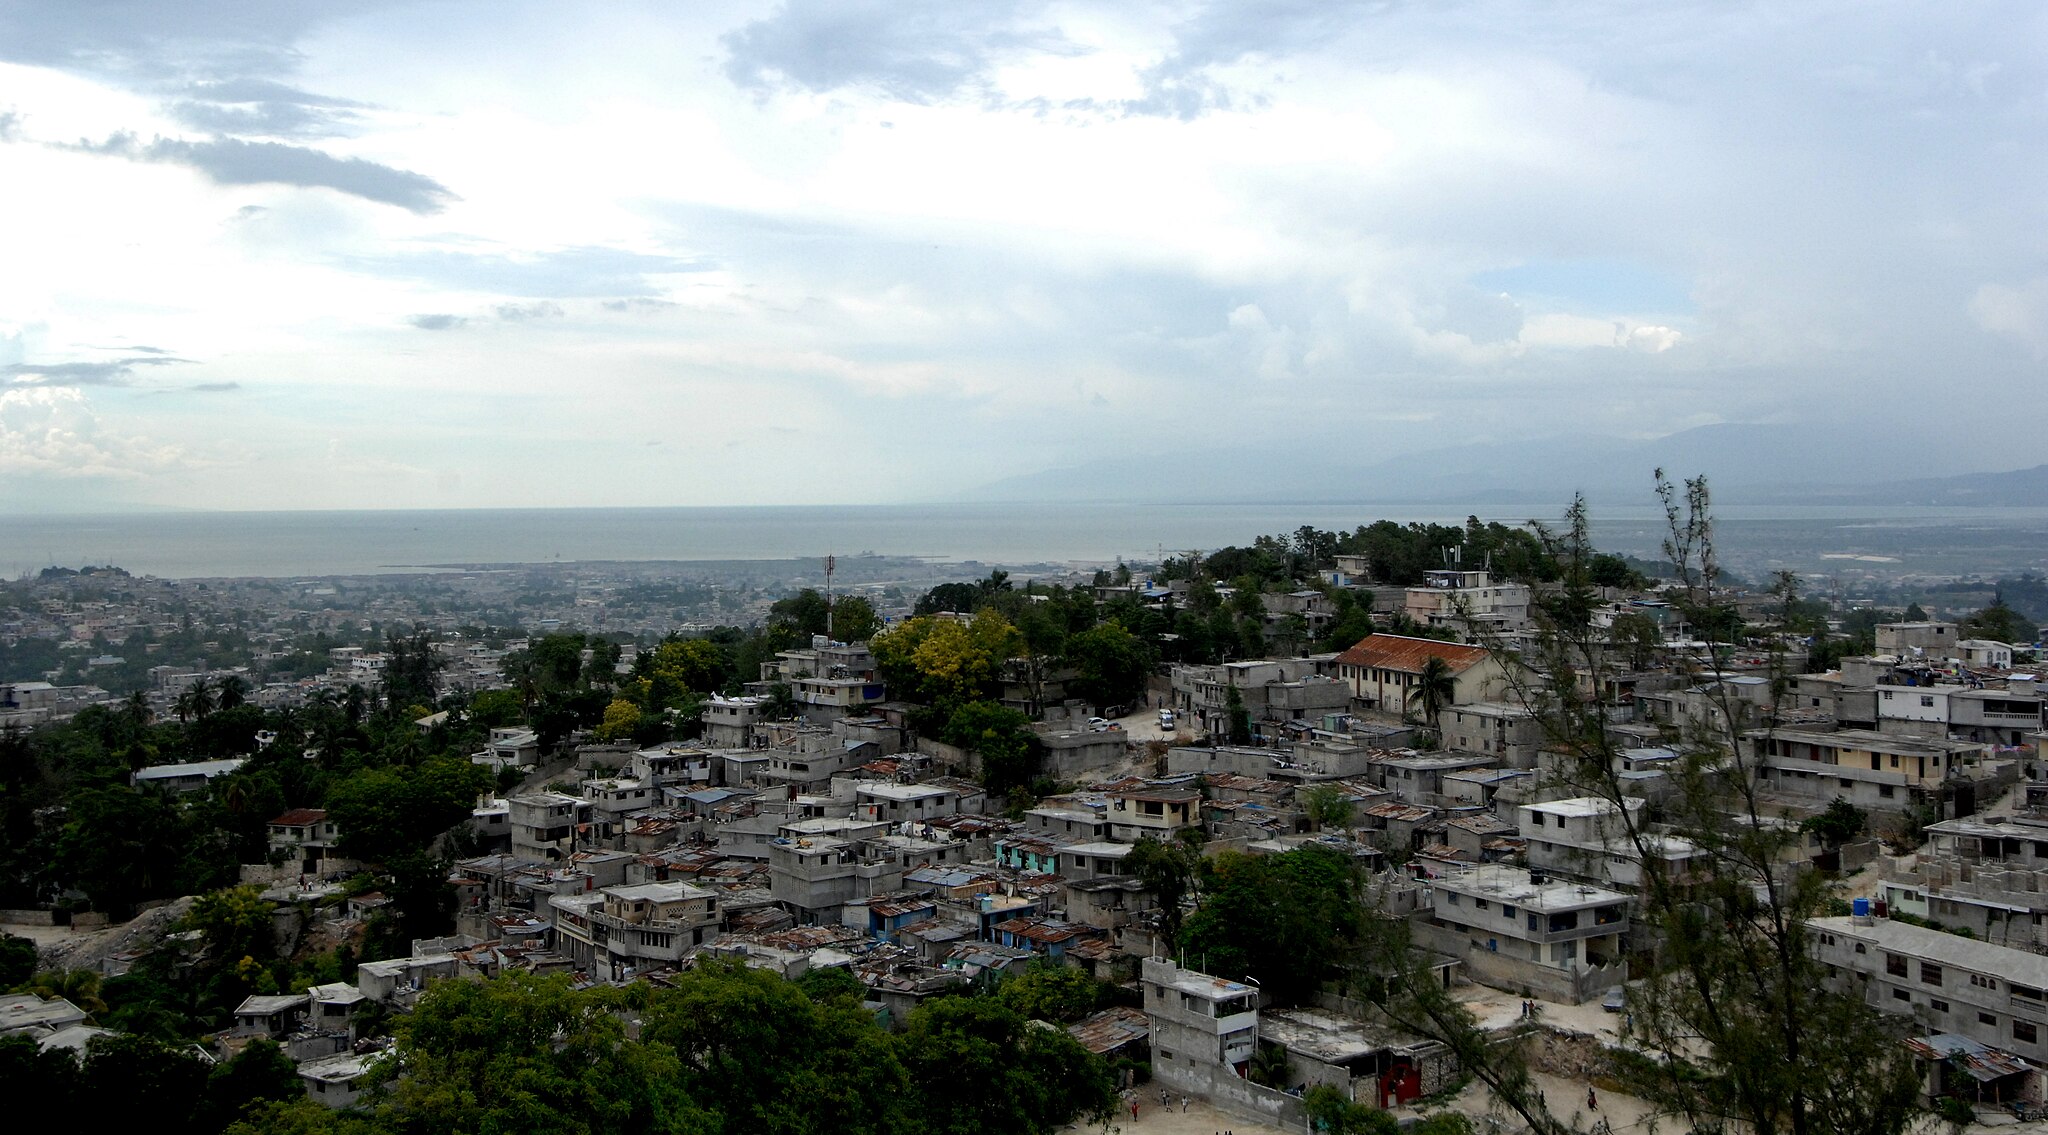 UN warns of growing power of gangs in Haiti igniting tensions across the Caribbean